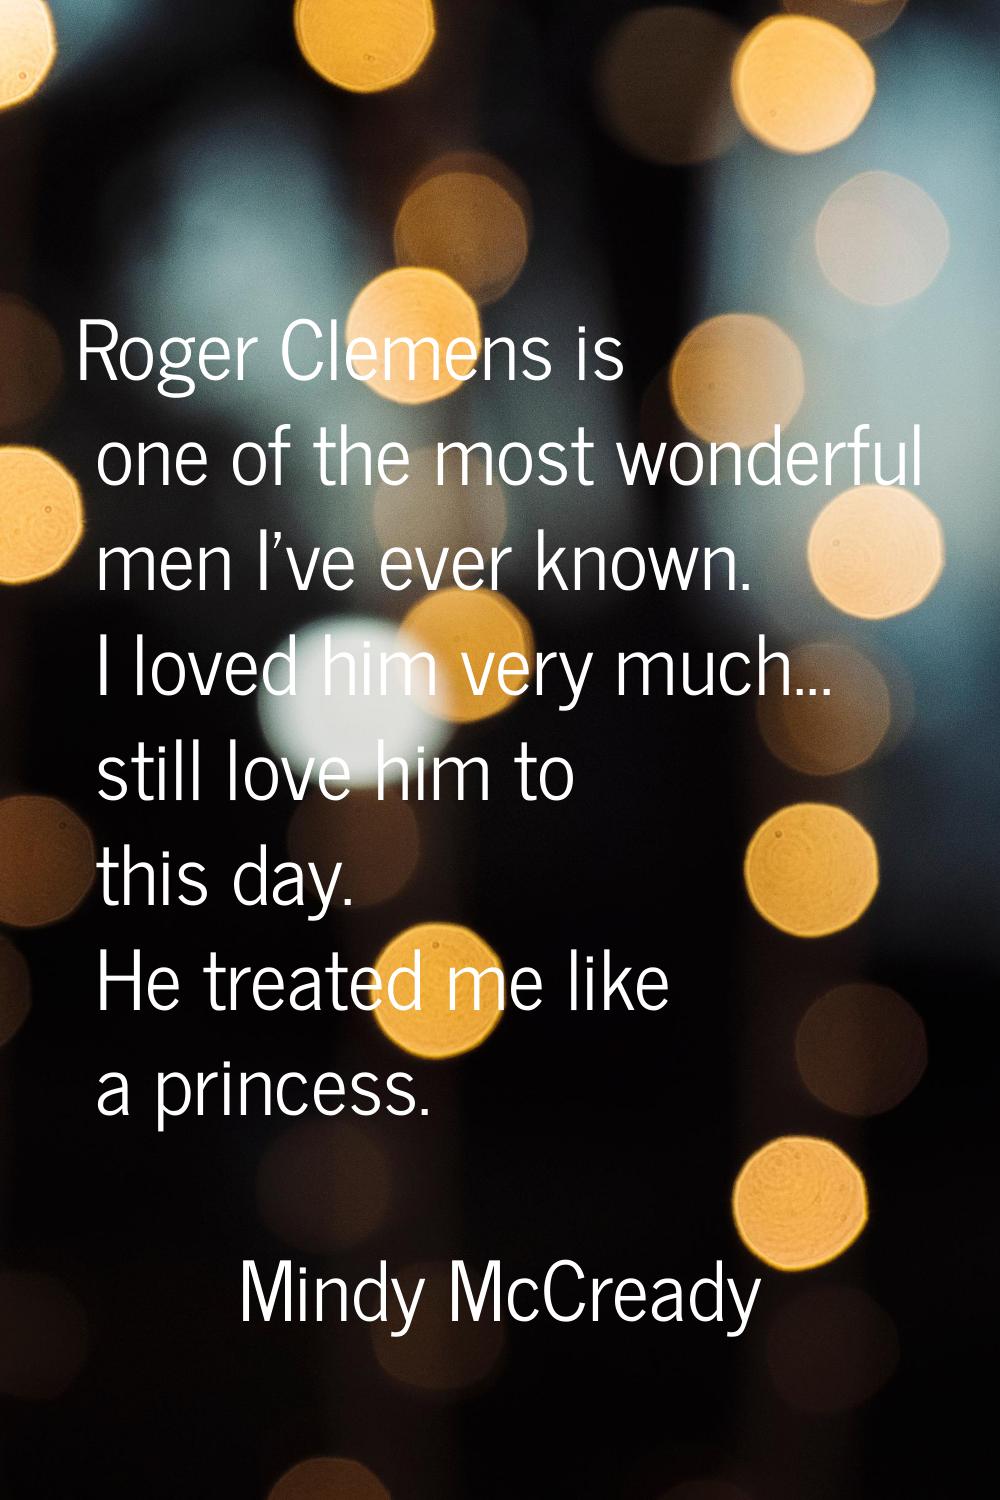 Roger Clemens is one of the most wonderful men I've ever known. I loved him very much... still love